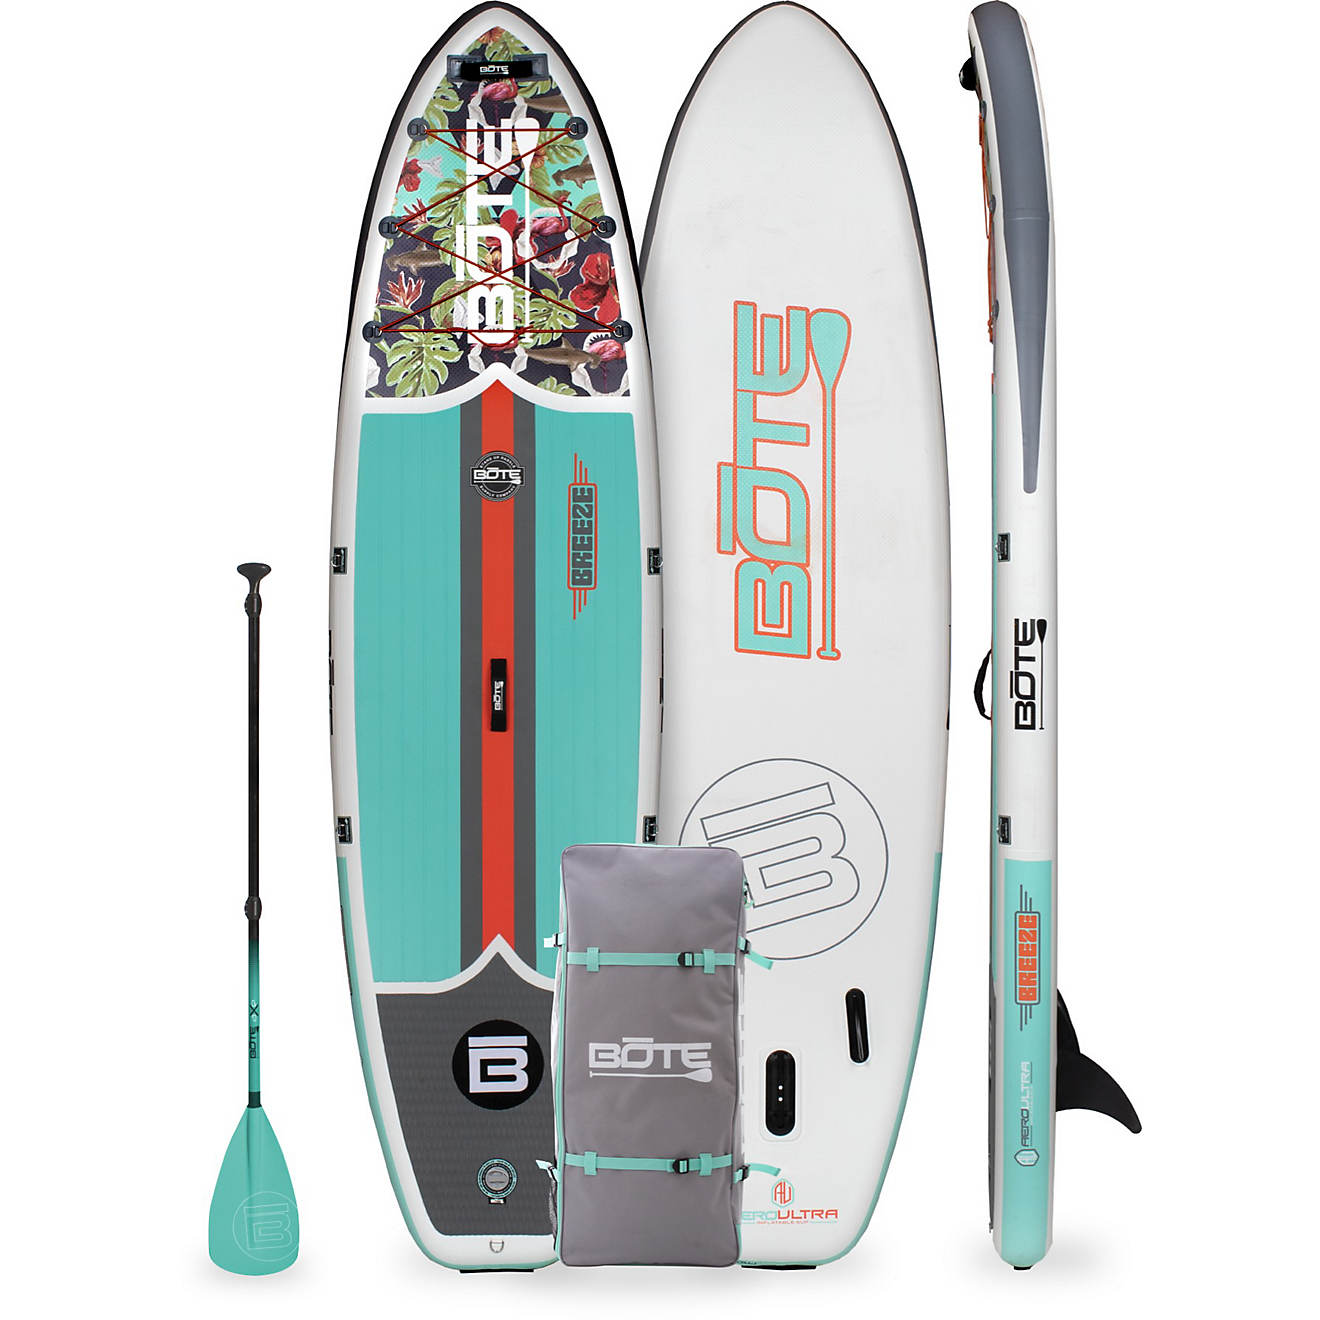 BOTE Breeze Aero 10'8" Native Floral Inflatable Stand Up Paddle Board